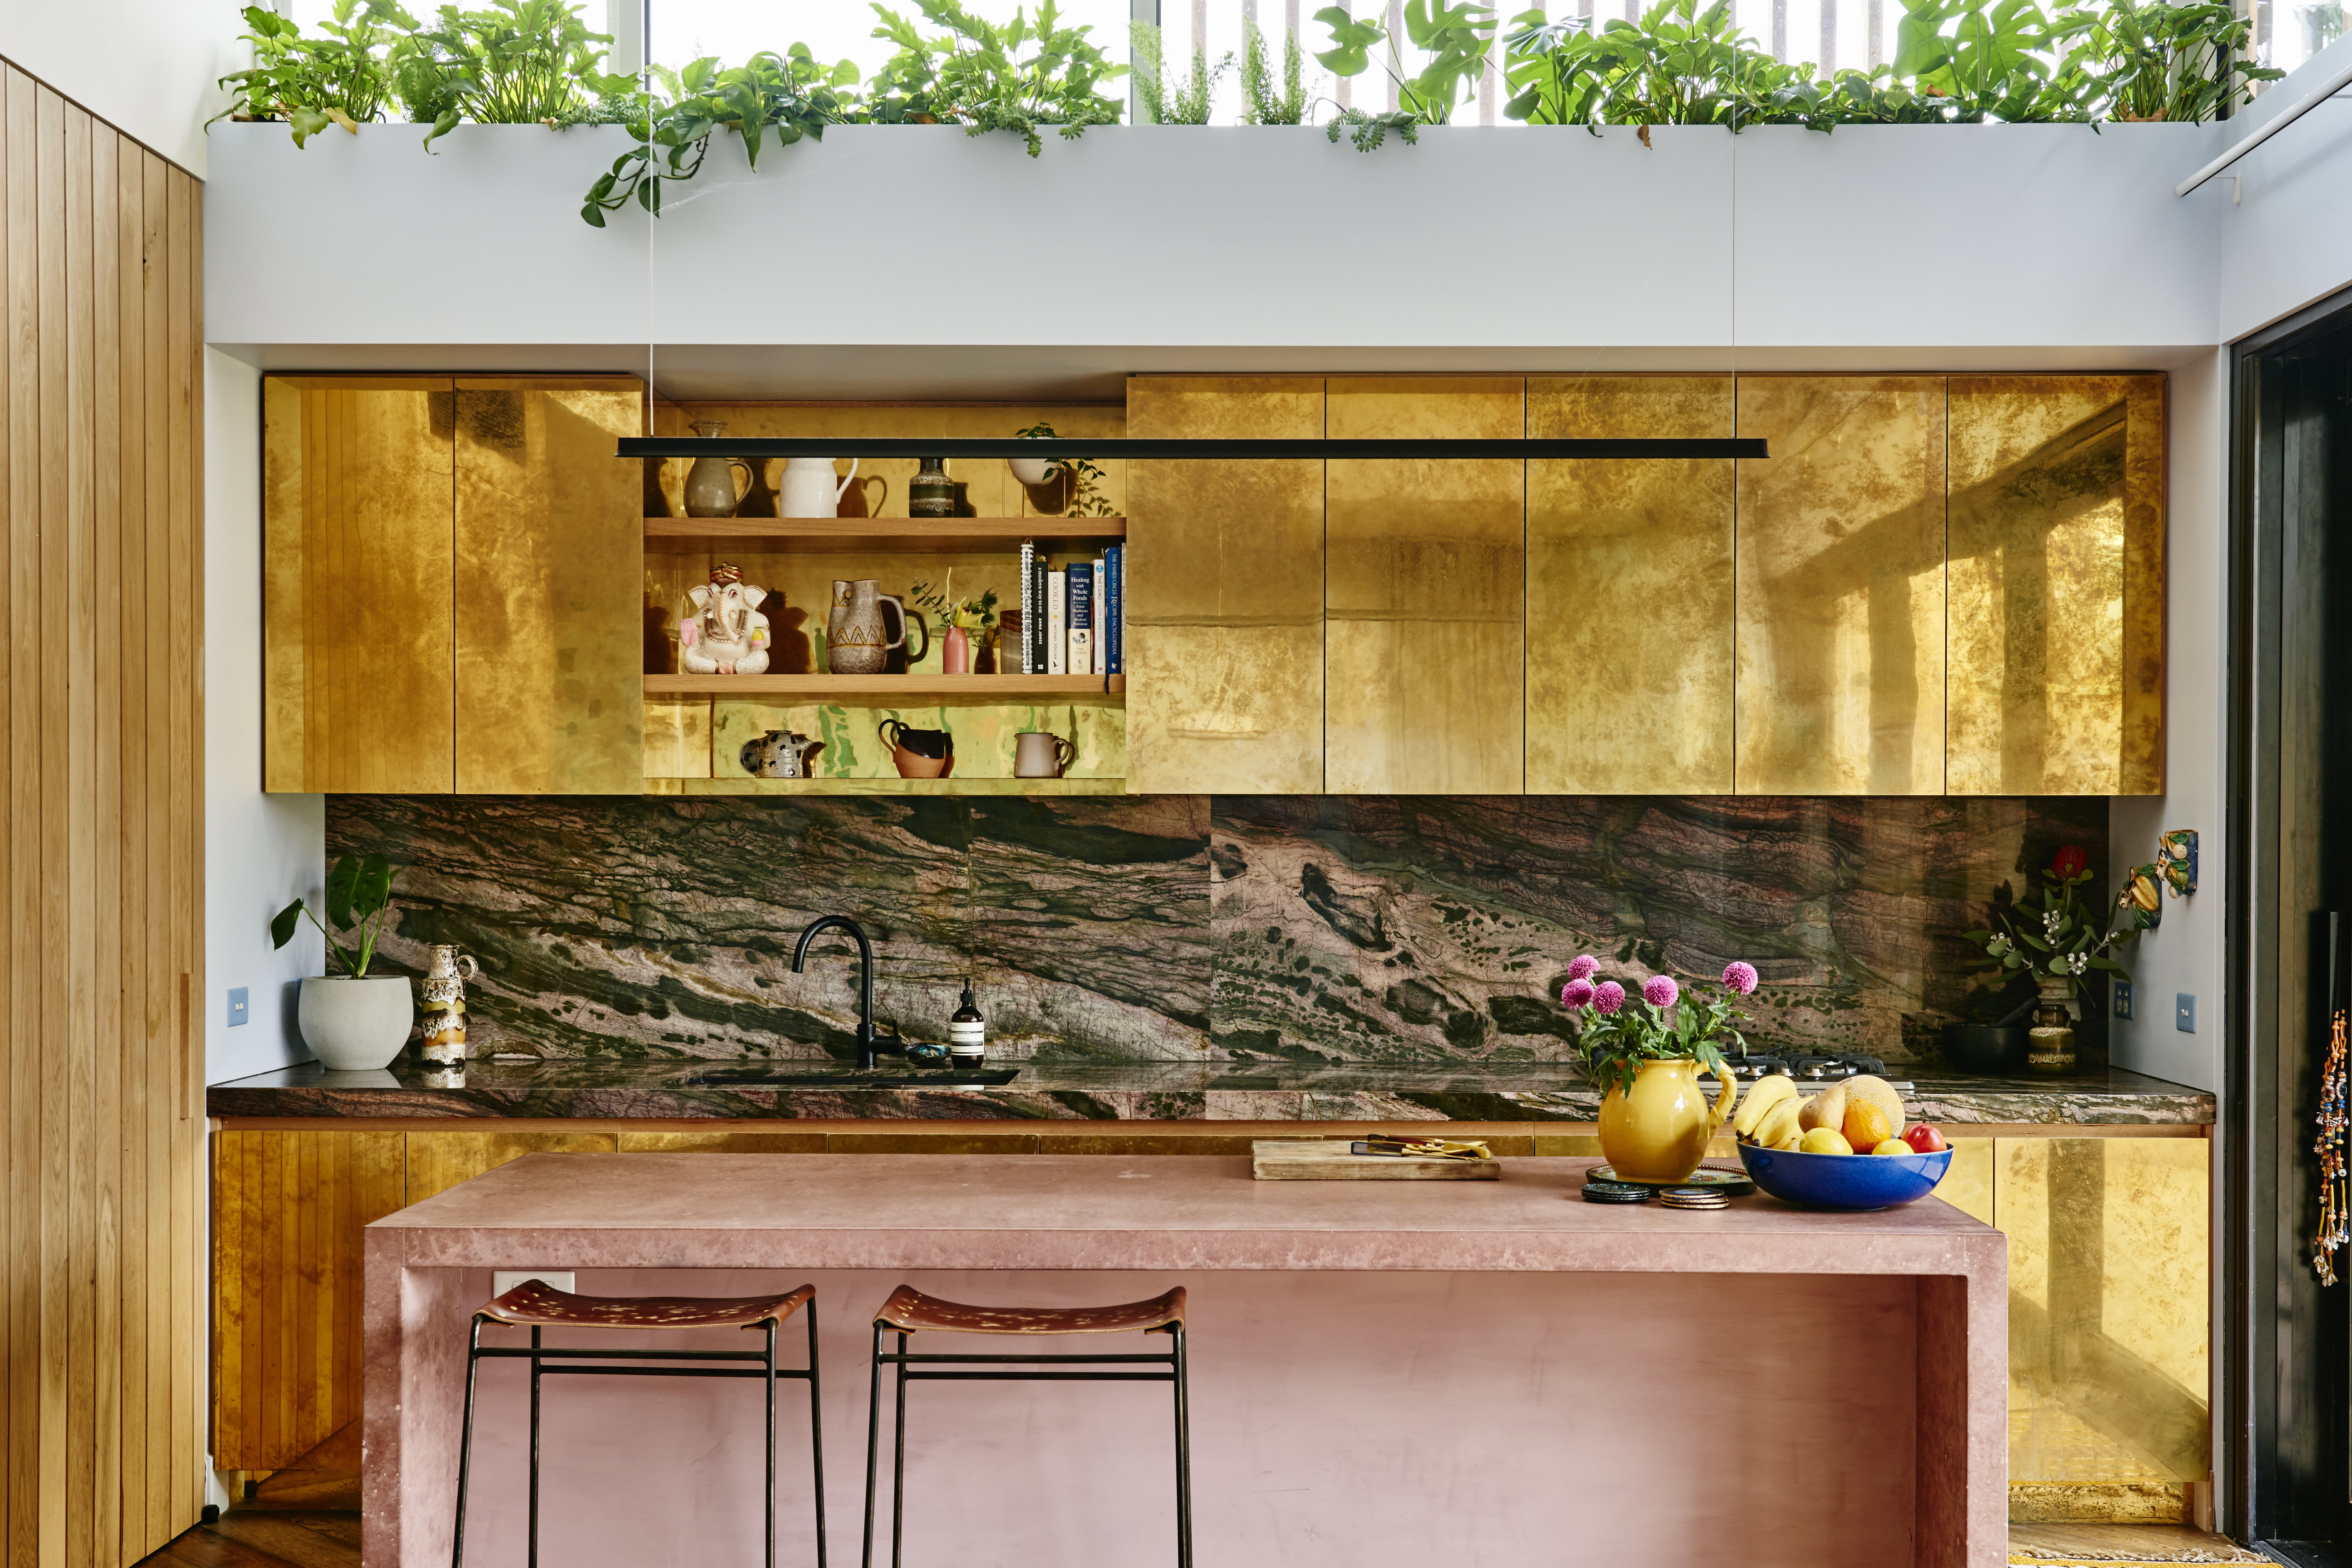 The 20 Hottest Kitchen and Bath Trends Taking the Design World by ...